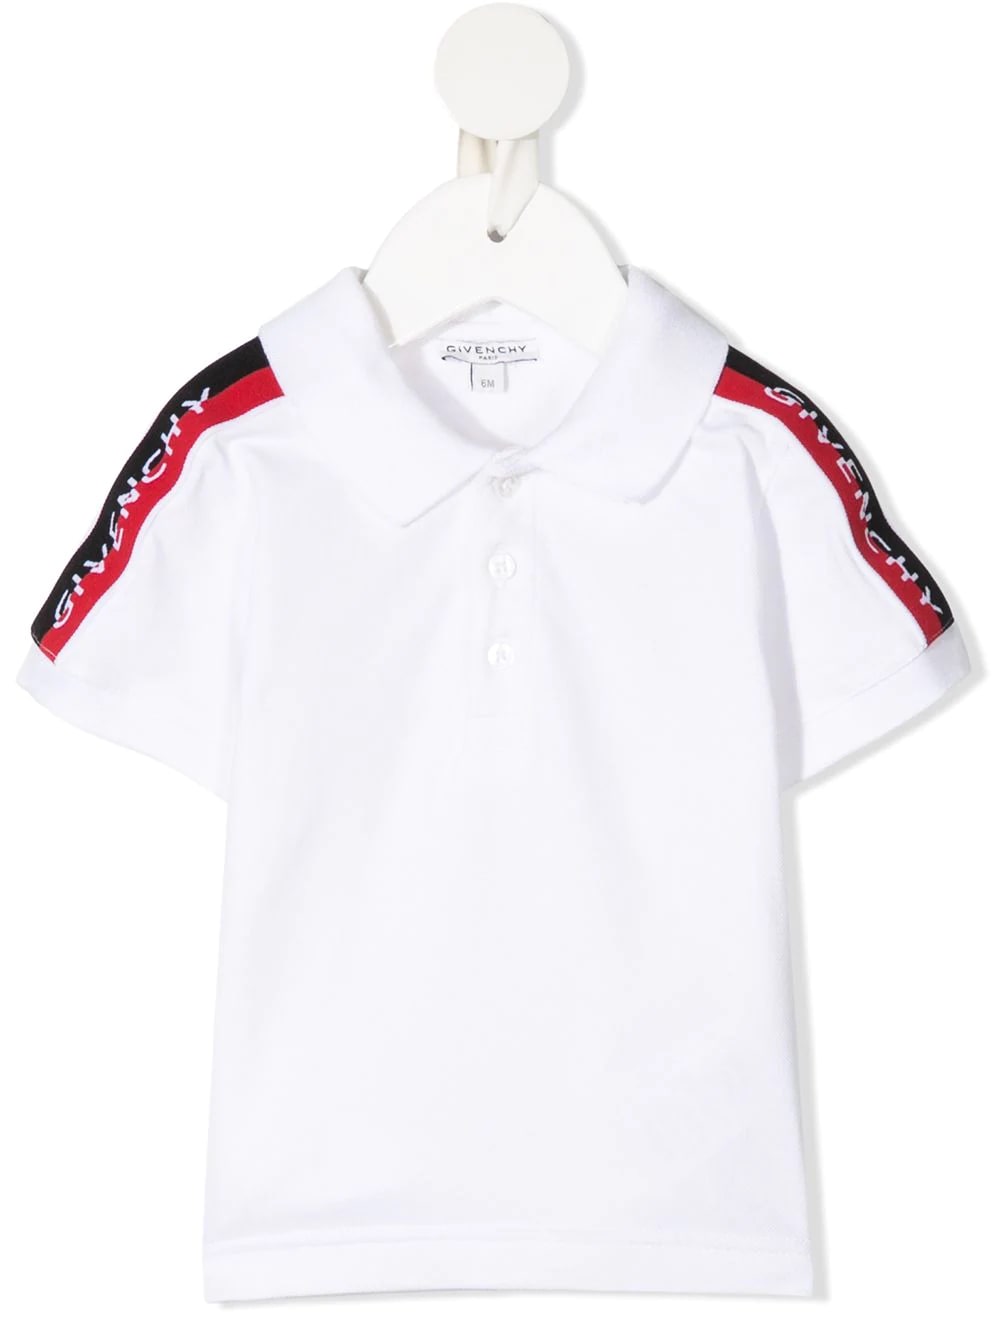 Newborn White Polo Shirt With Givenchy Ribbons